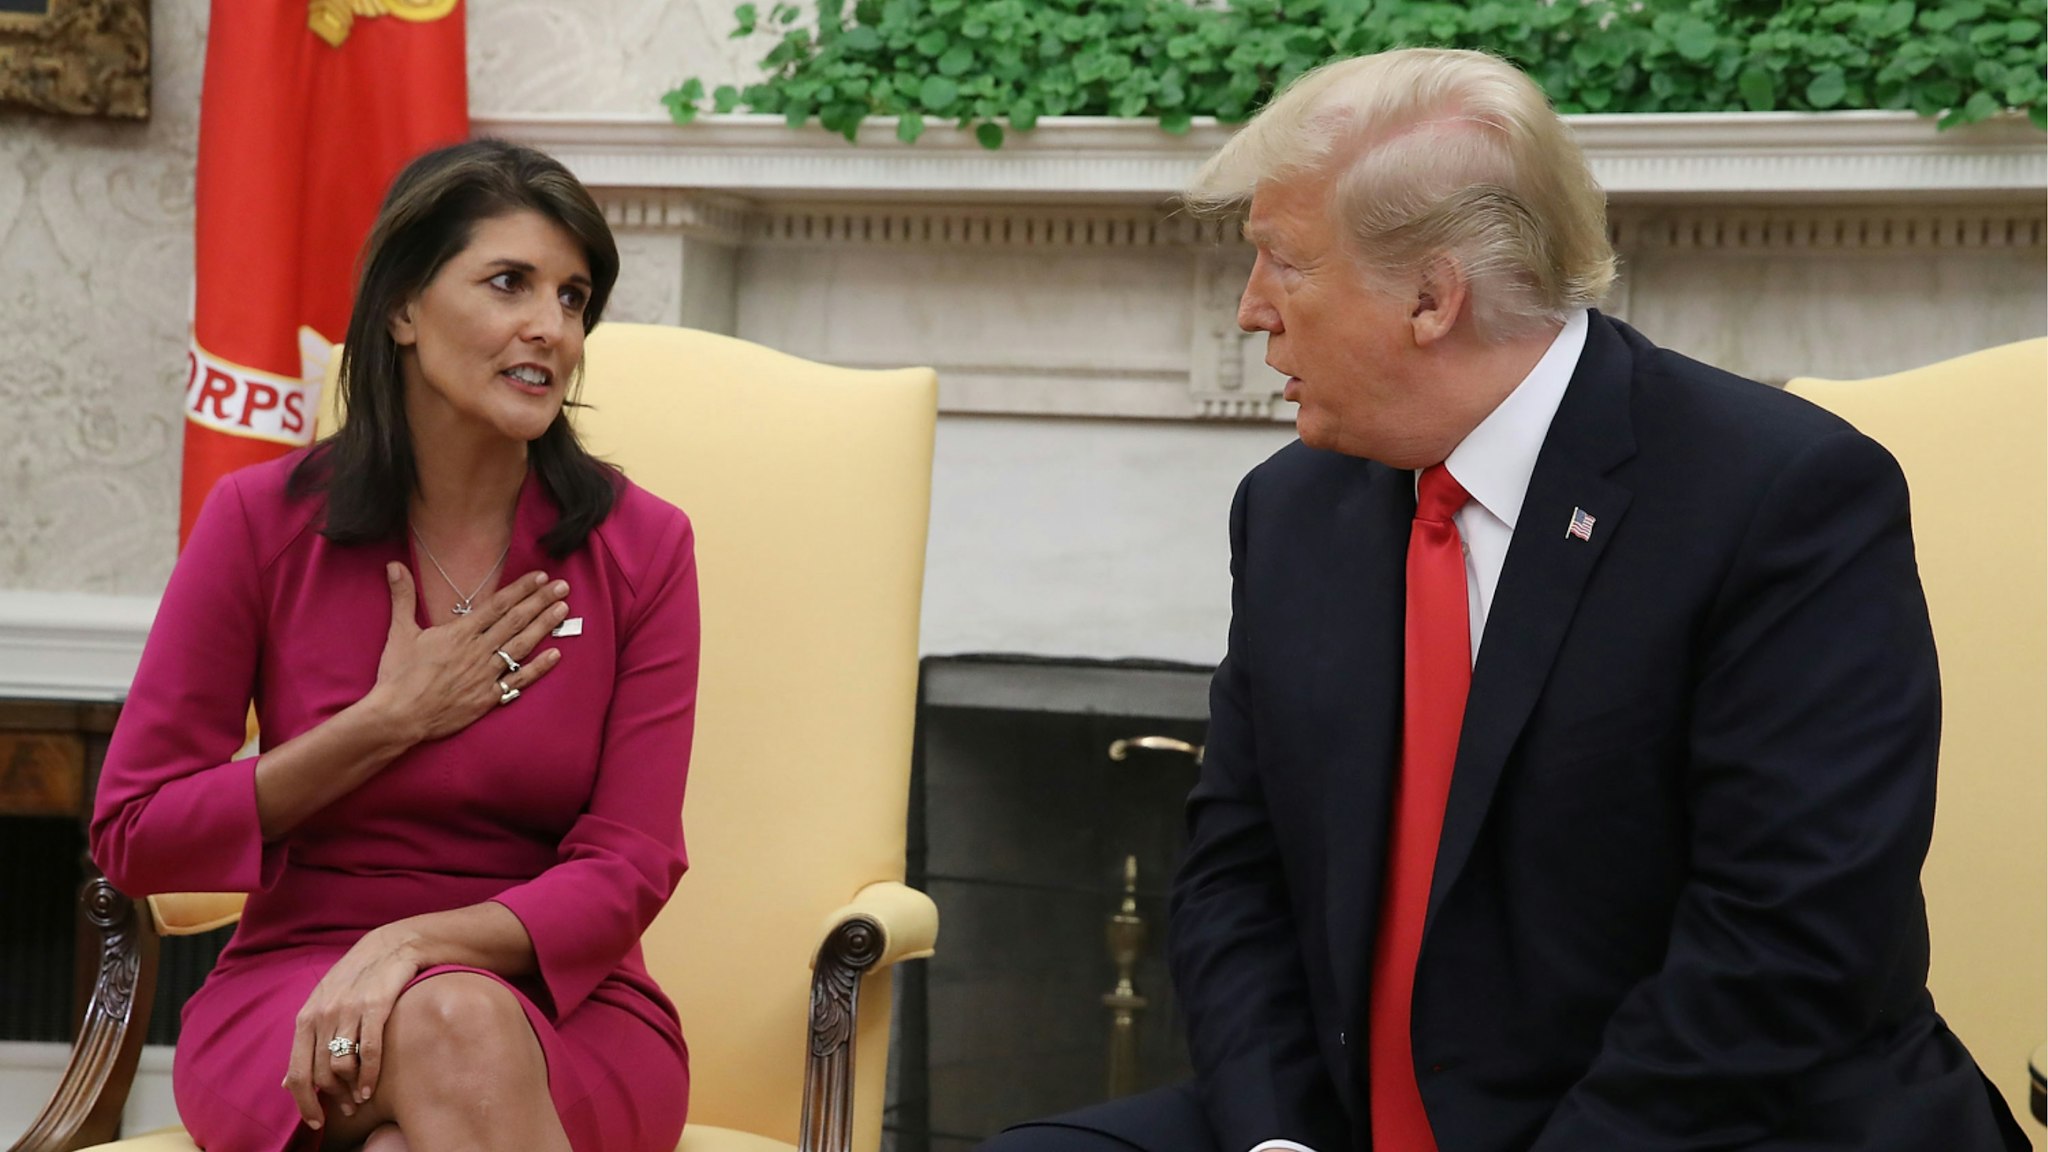 U.S. President Donald Trump announces that he has accepted the resignation of Nikki Haley as US Ambassador to the United Nations, in the Oval Office on October 9, 2018 in Washington, DC.